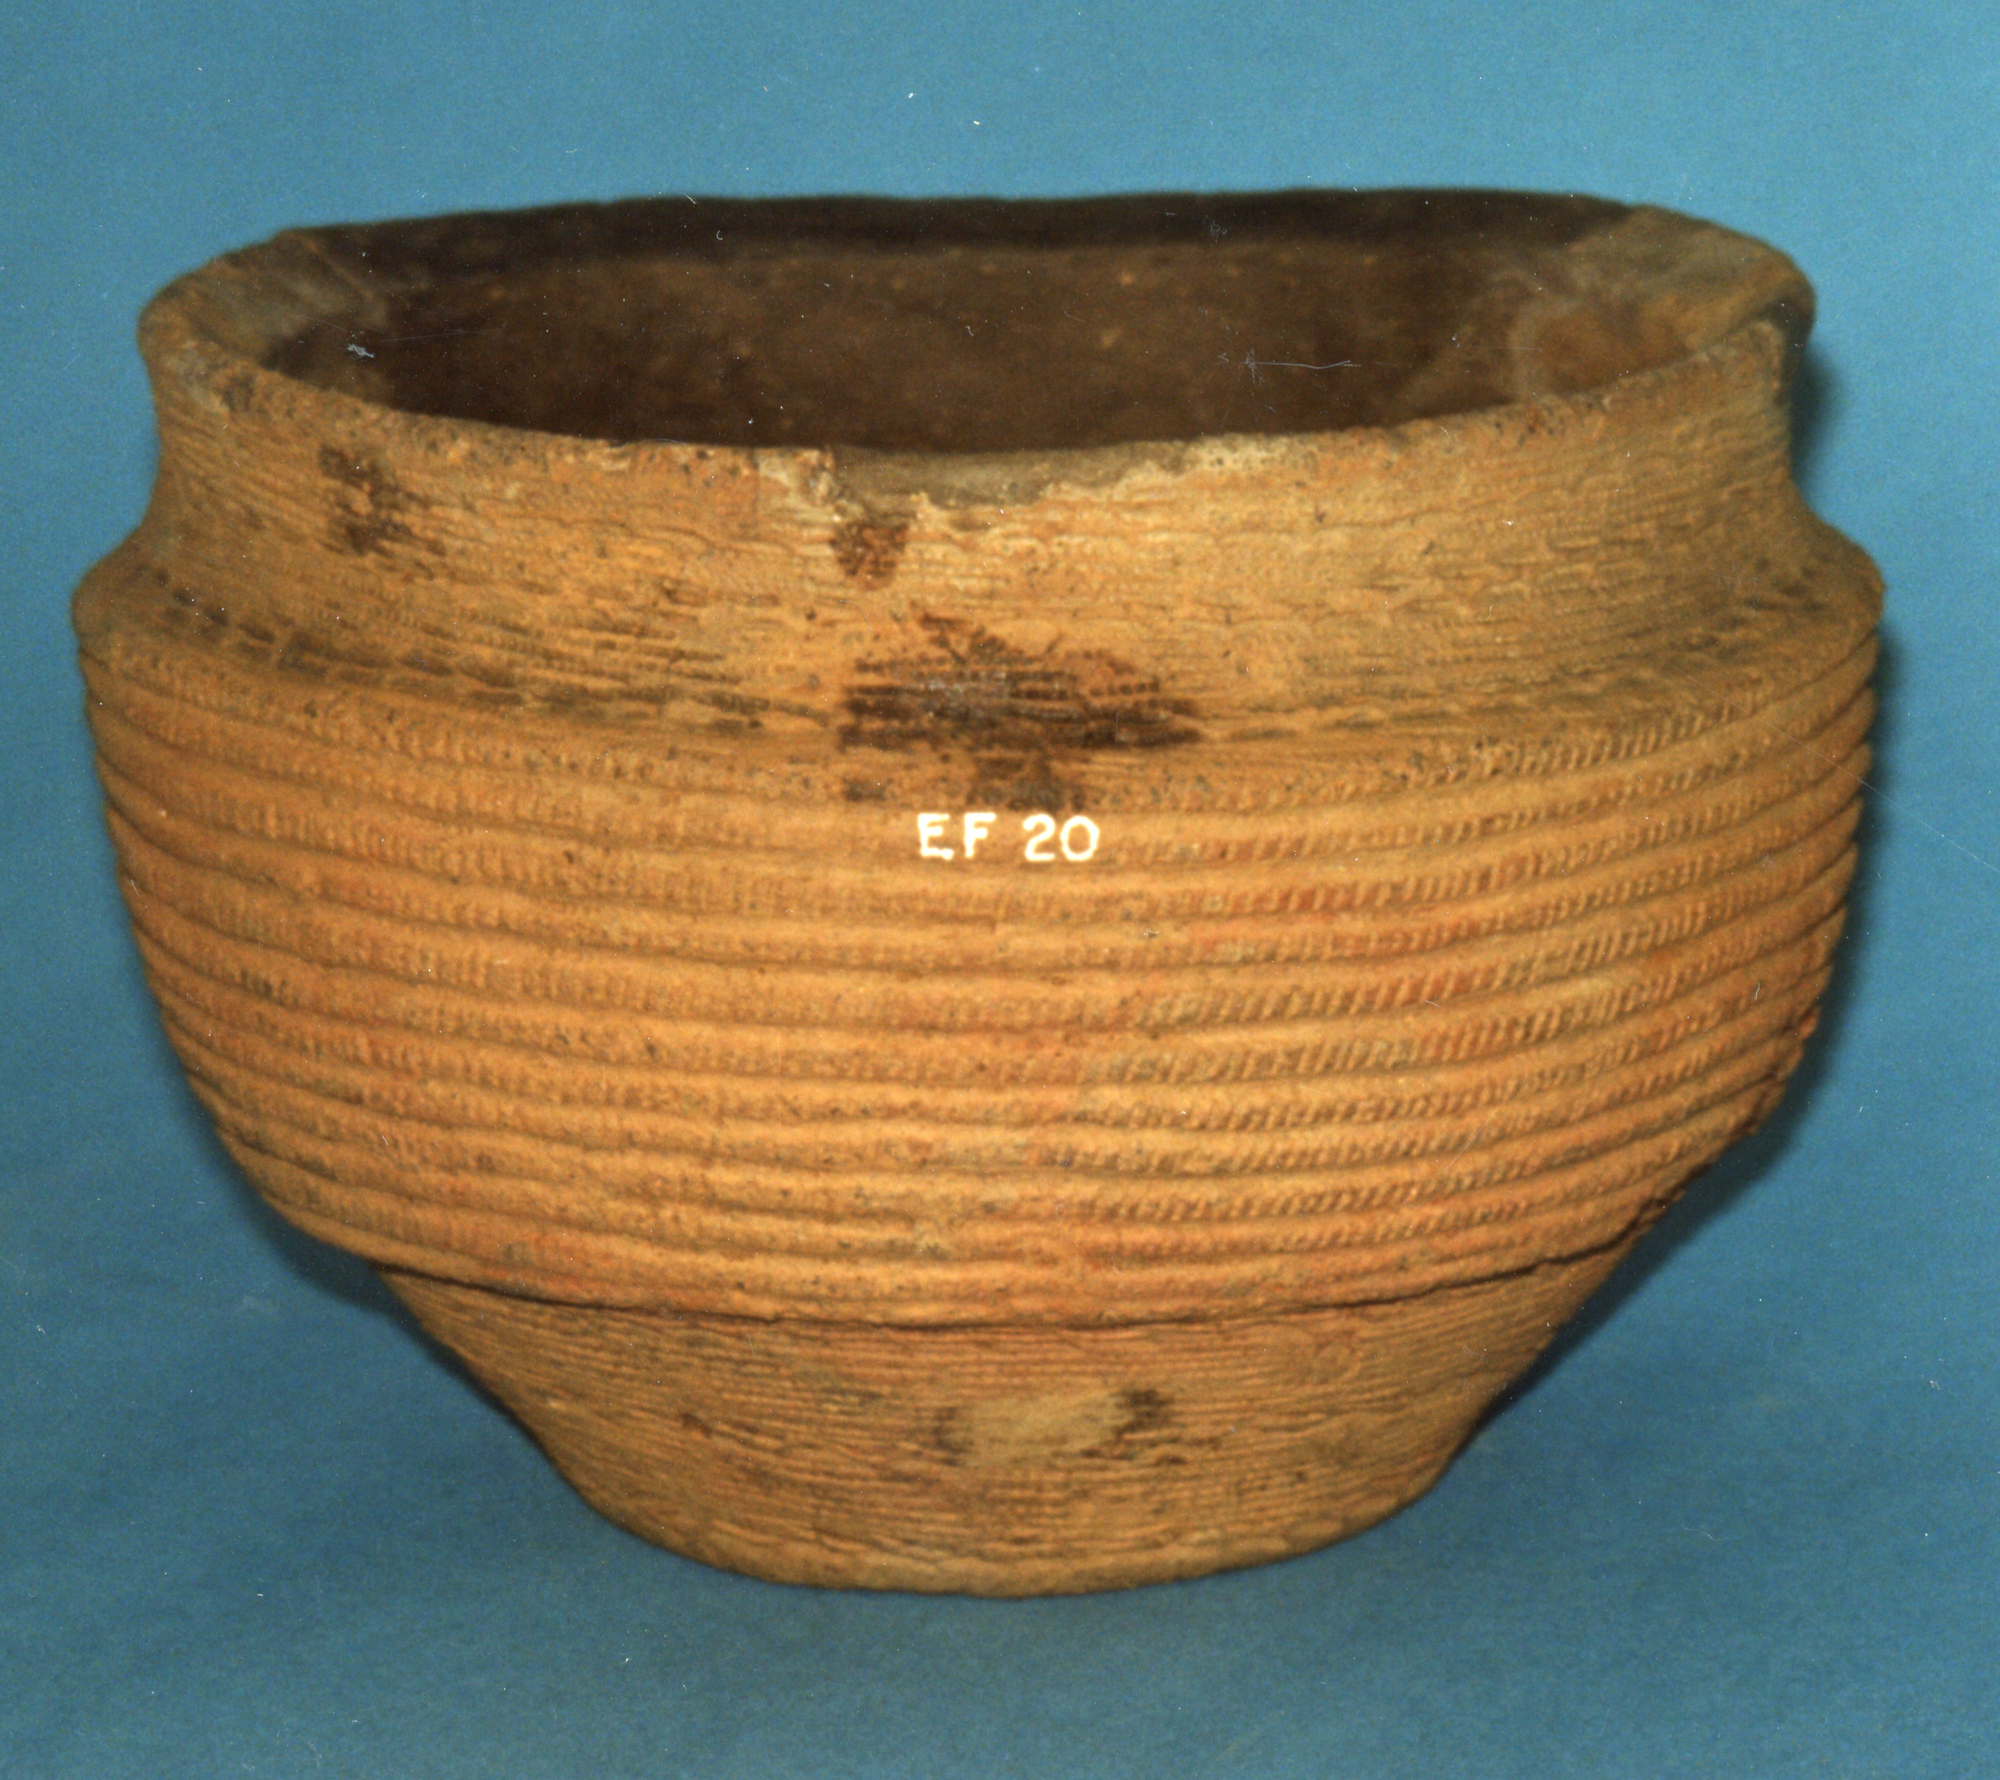 Image of Pottery food vessel from Kilcattan, Londonderry, Northern Ireland © National Museums Scotland